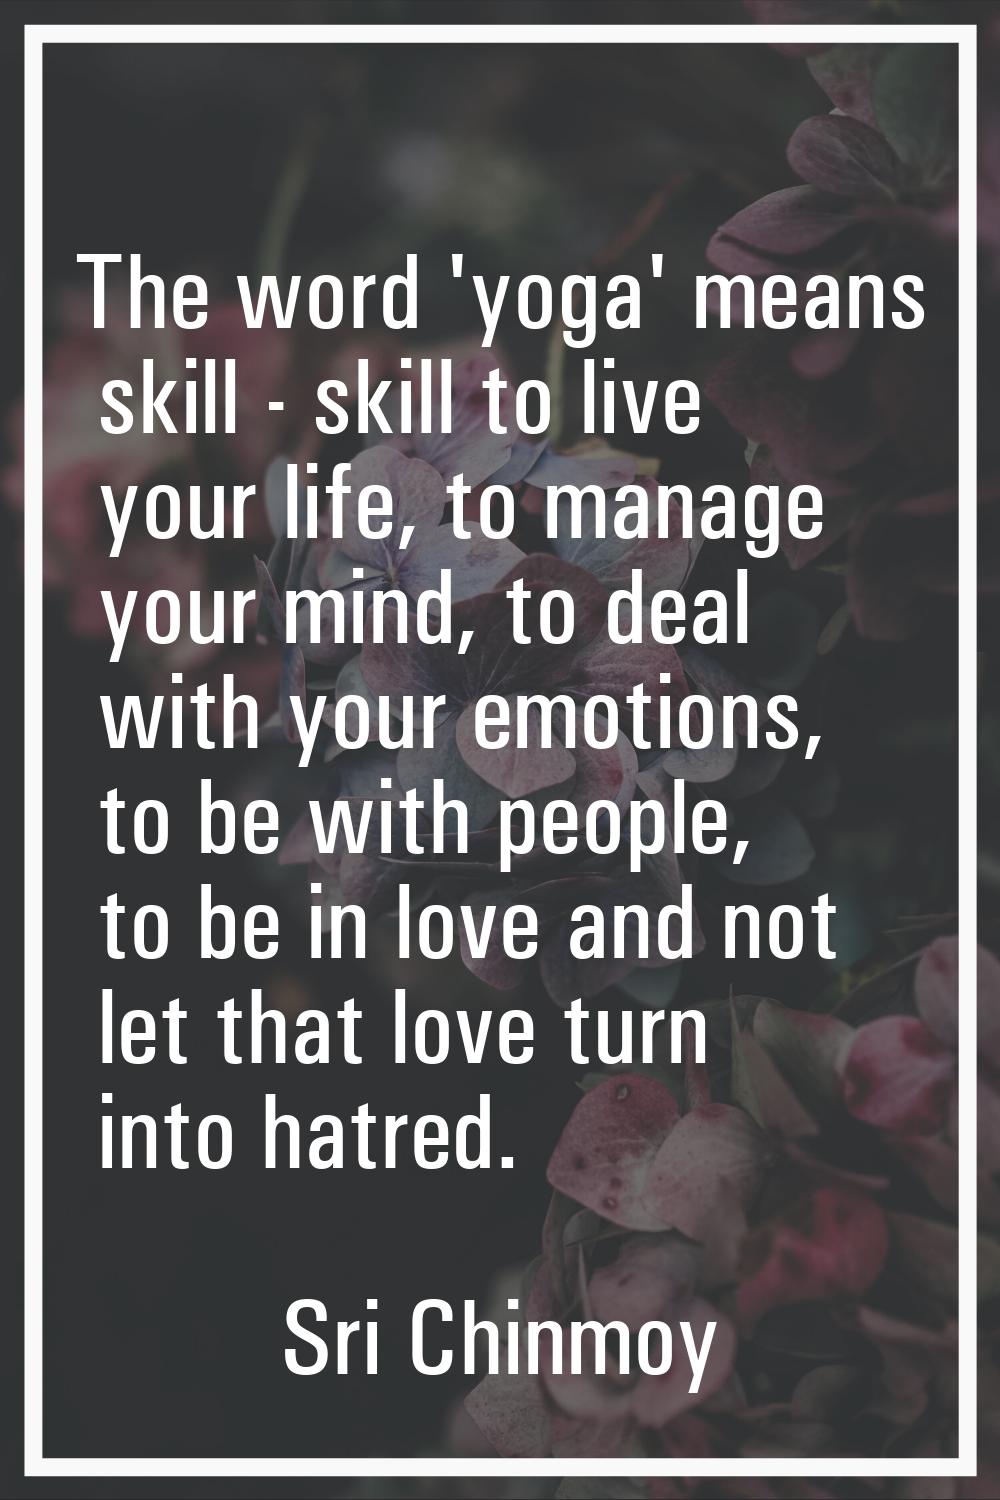 The word 'yoga' means skill - skill to live your life, to manage your mind, to deal with your emoti